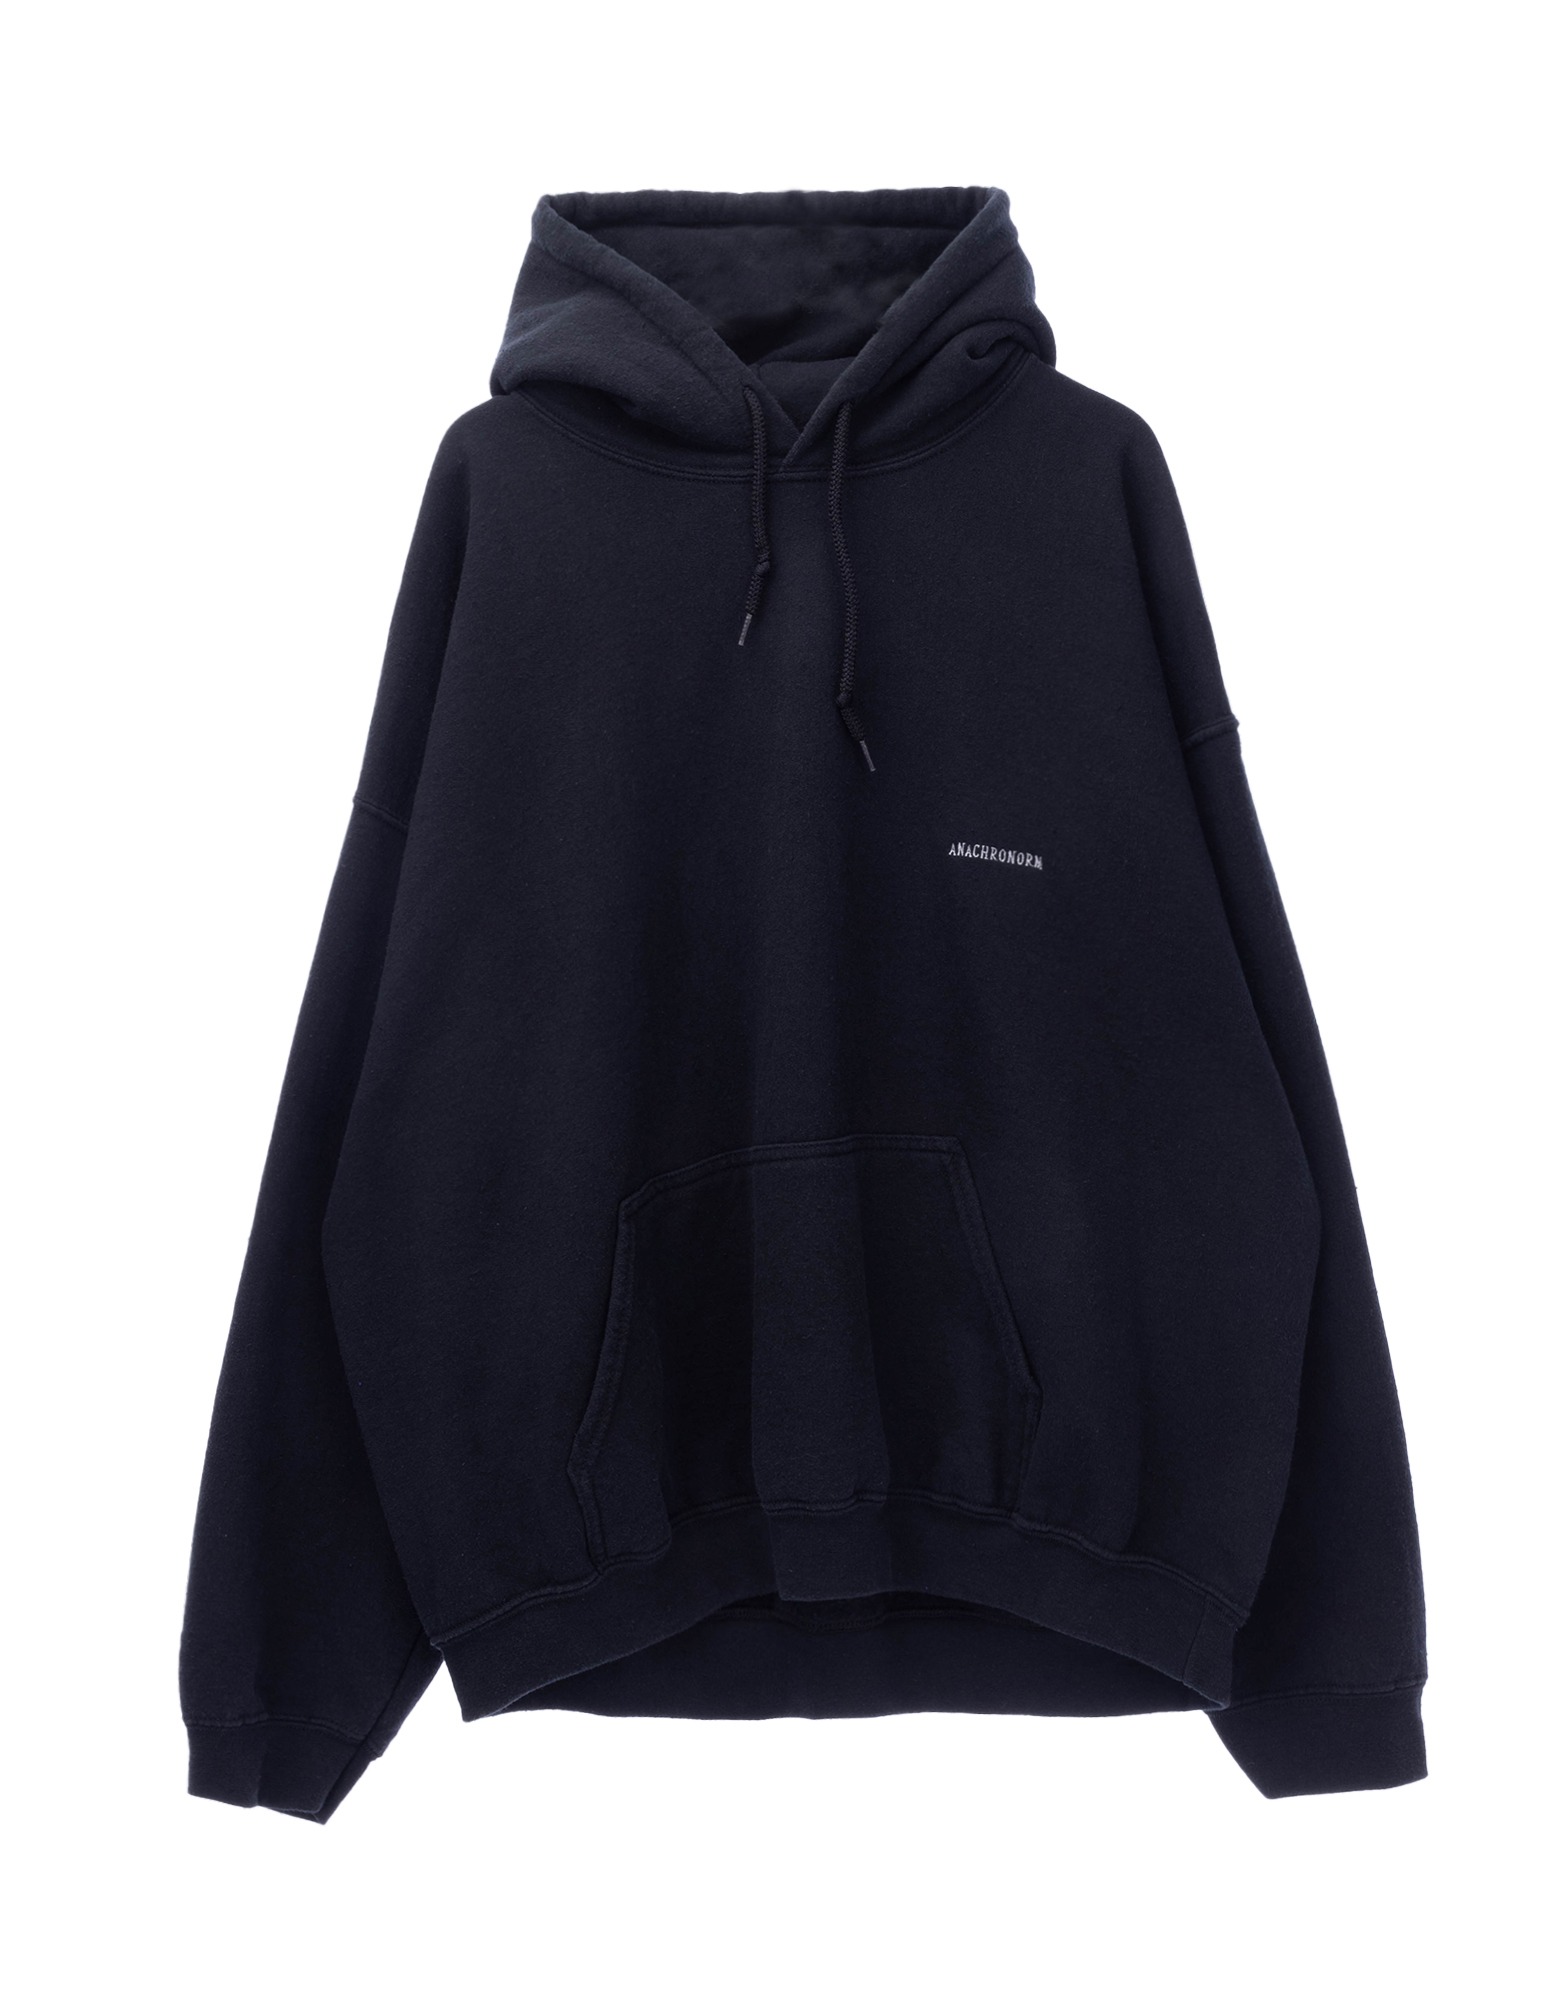 NM-SW03 50/50 NAPPING PARKA (Black)